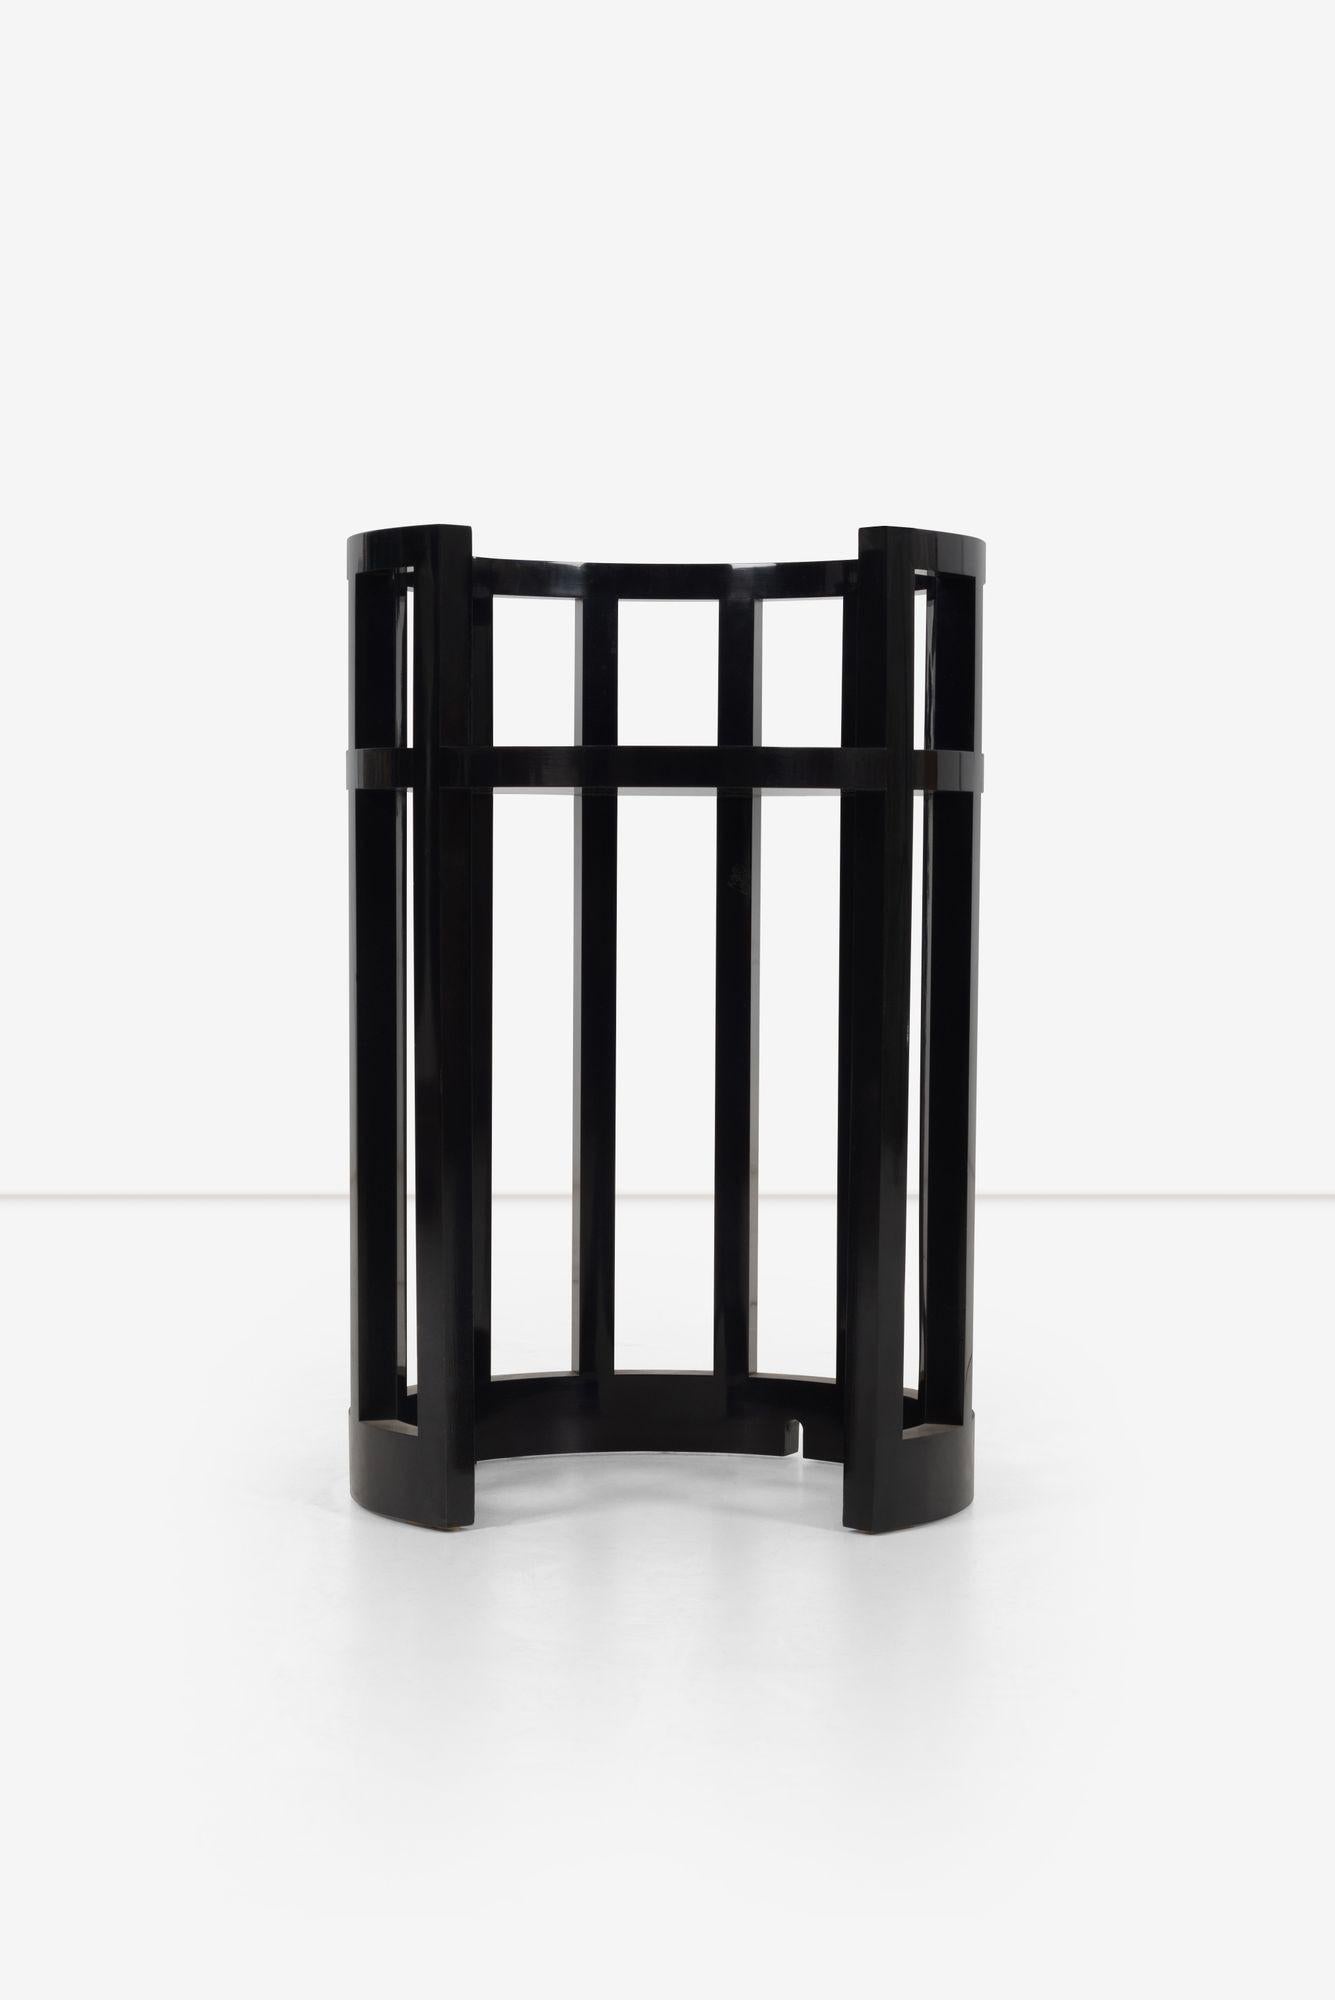 Richard Meier custom lamp table, black lacquer with cord notches.
Surface height 21.50